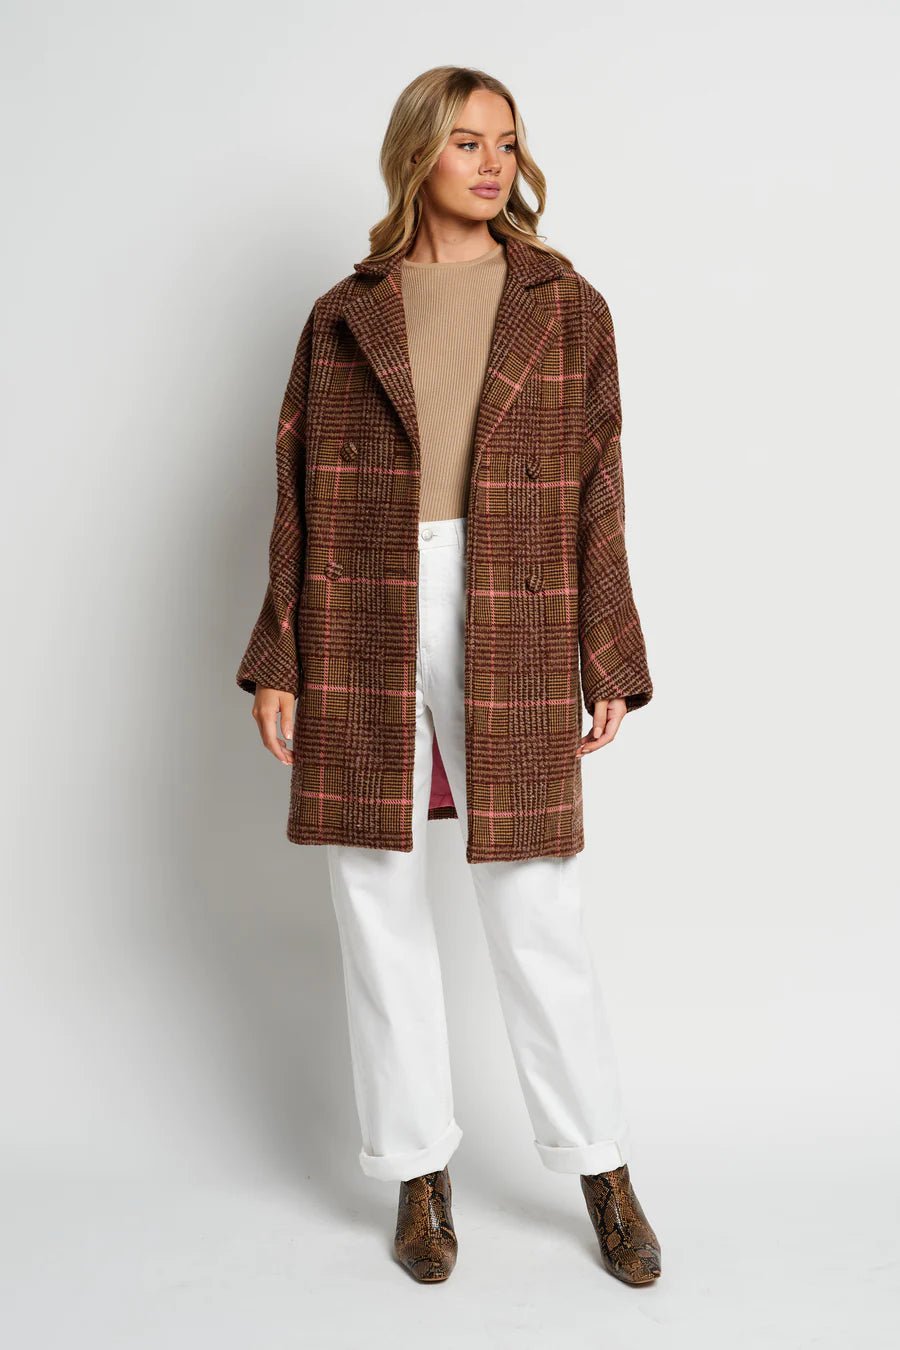 Phoebe Oversized Coat - Brown/Pink Check - Sare StoreApero LabelJacket